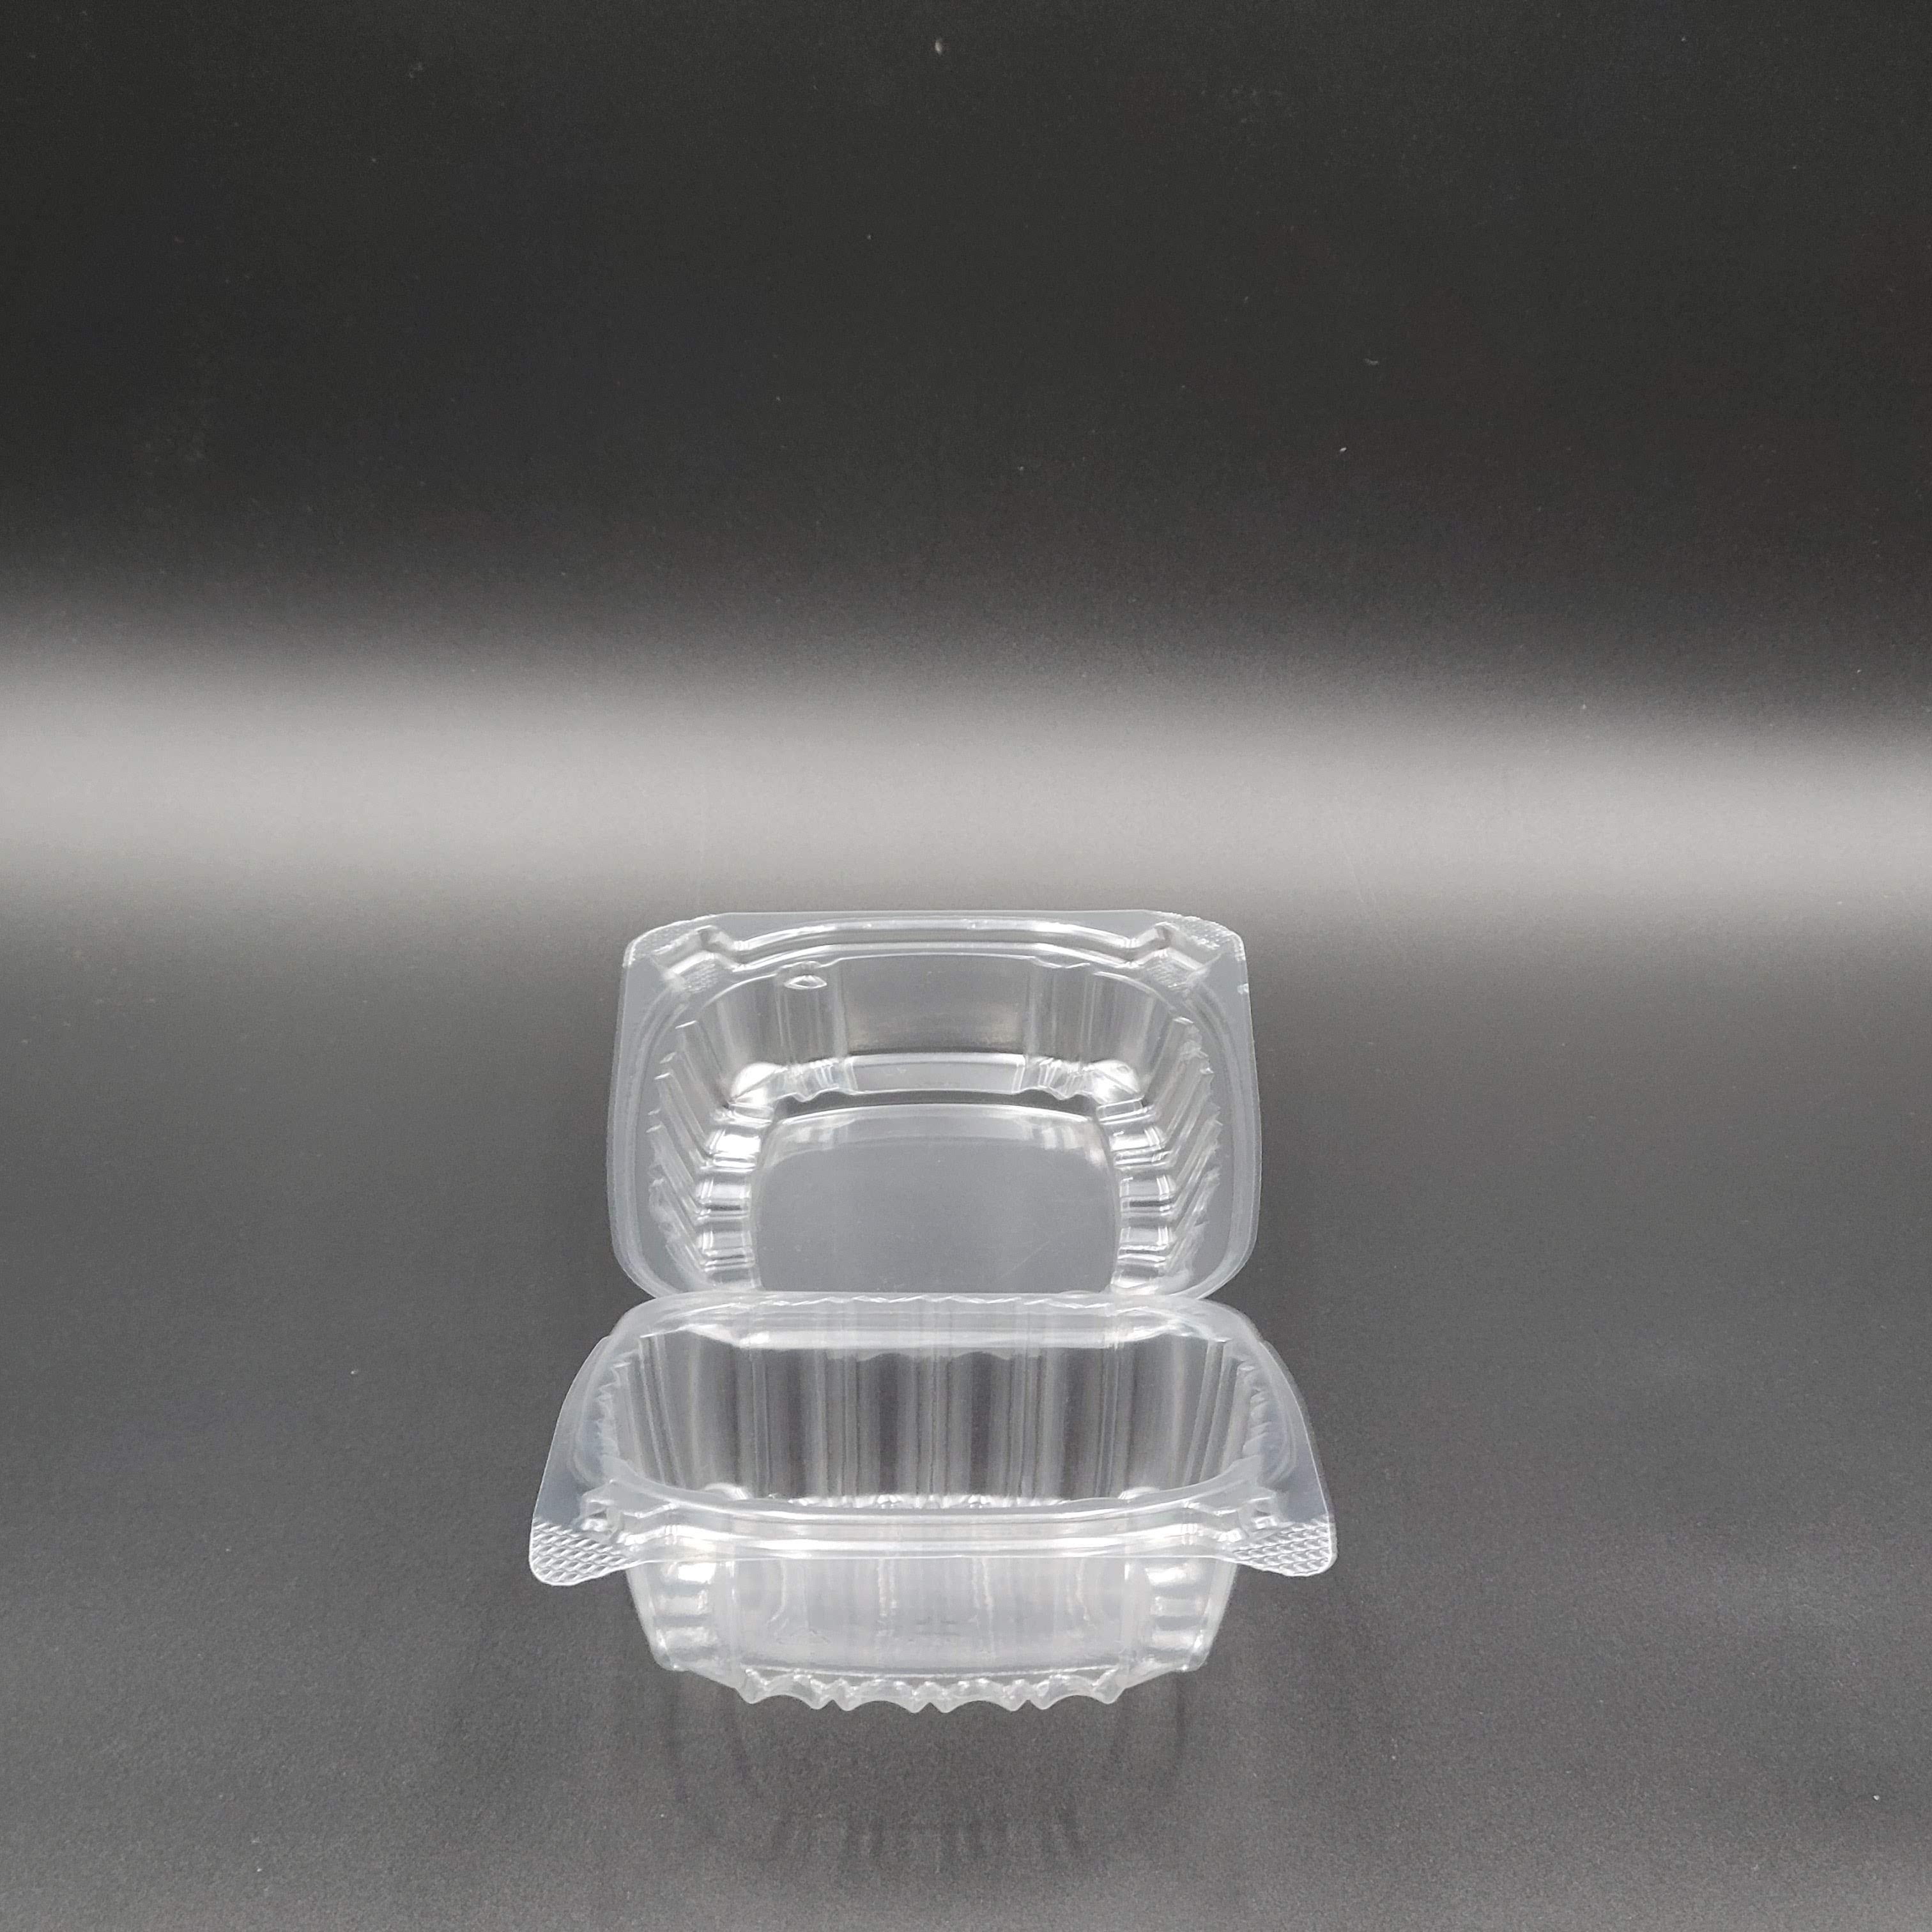 Dart Mfg. Clear Plastic Hinged Container 5-3/8" x 5-1/4" x 2-5/8" C53PST1 - 500/Case